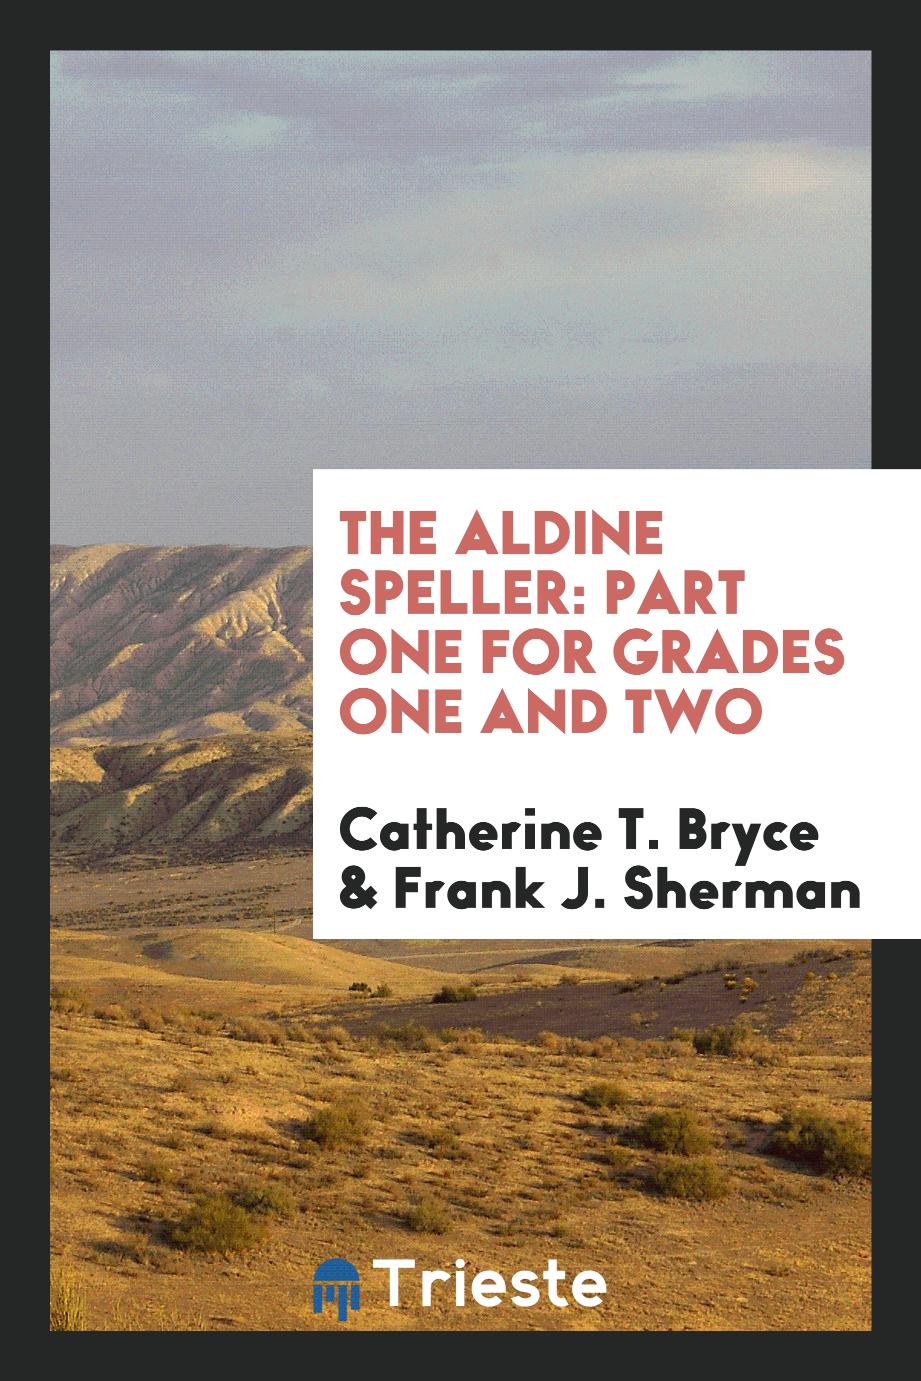 The Aldine Speller: Part One for Grades One and Two